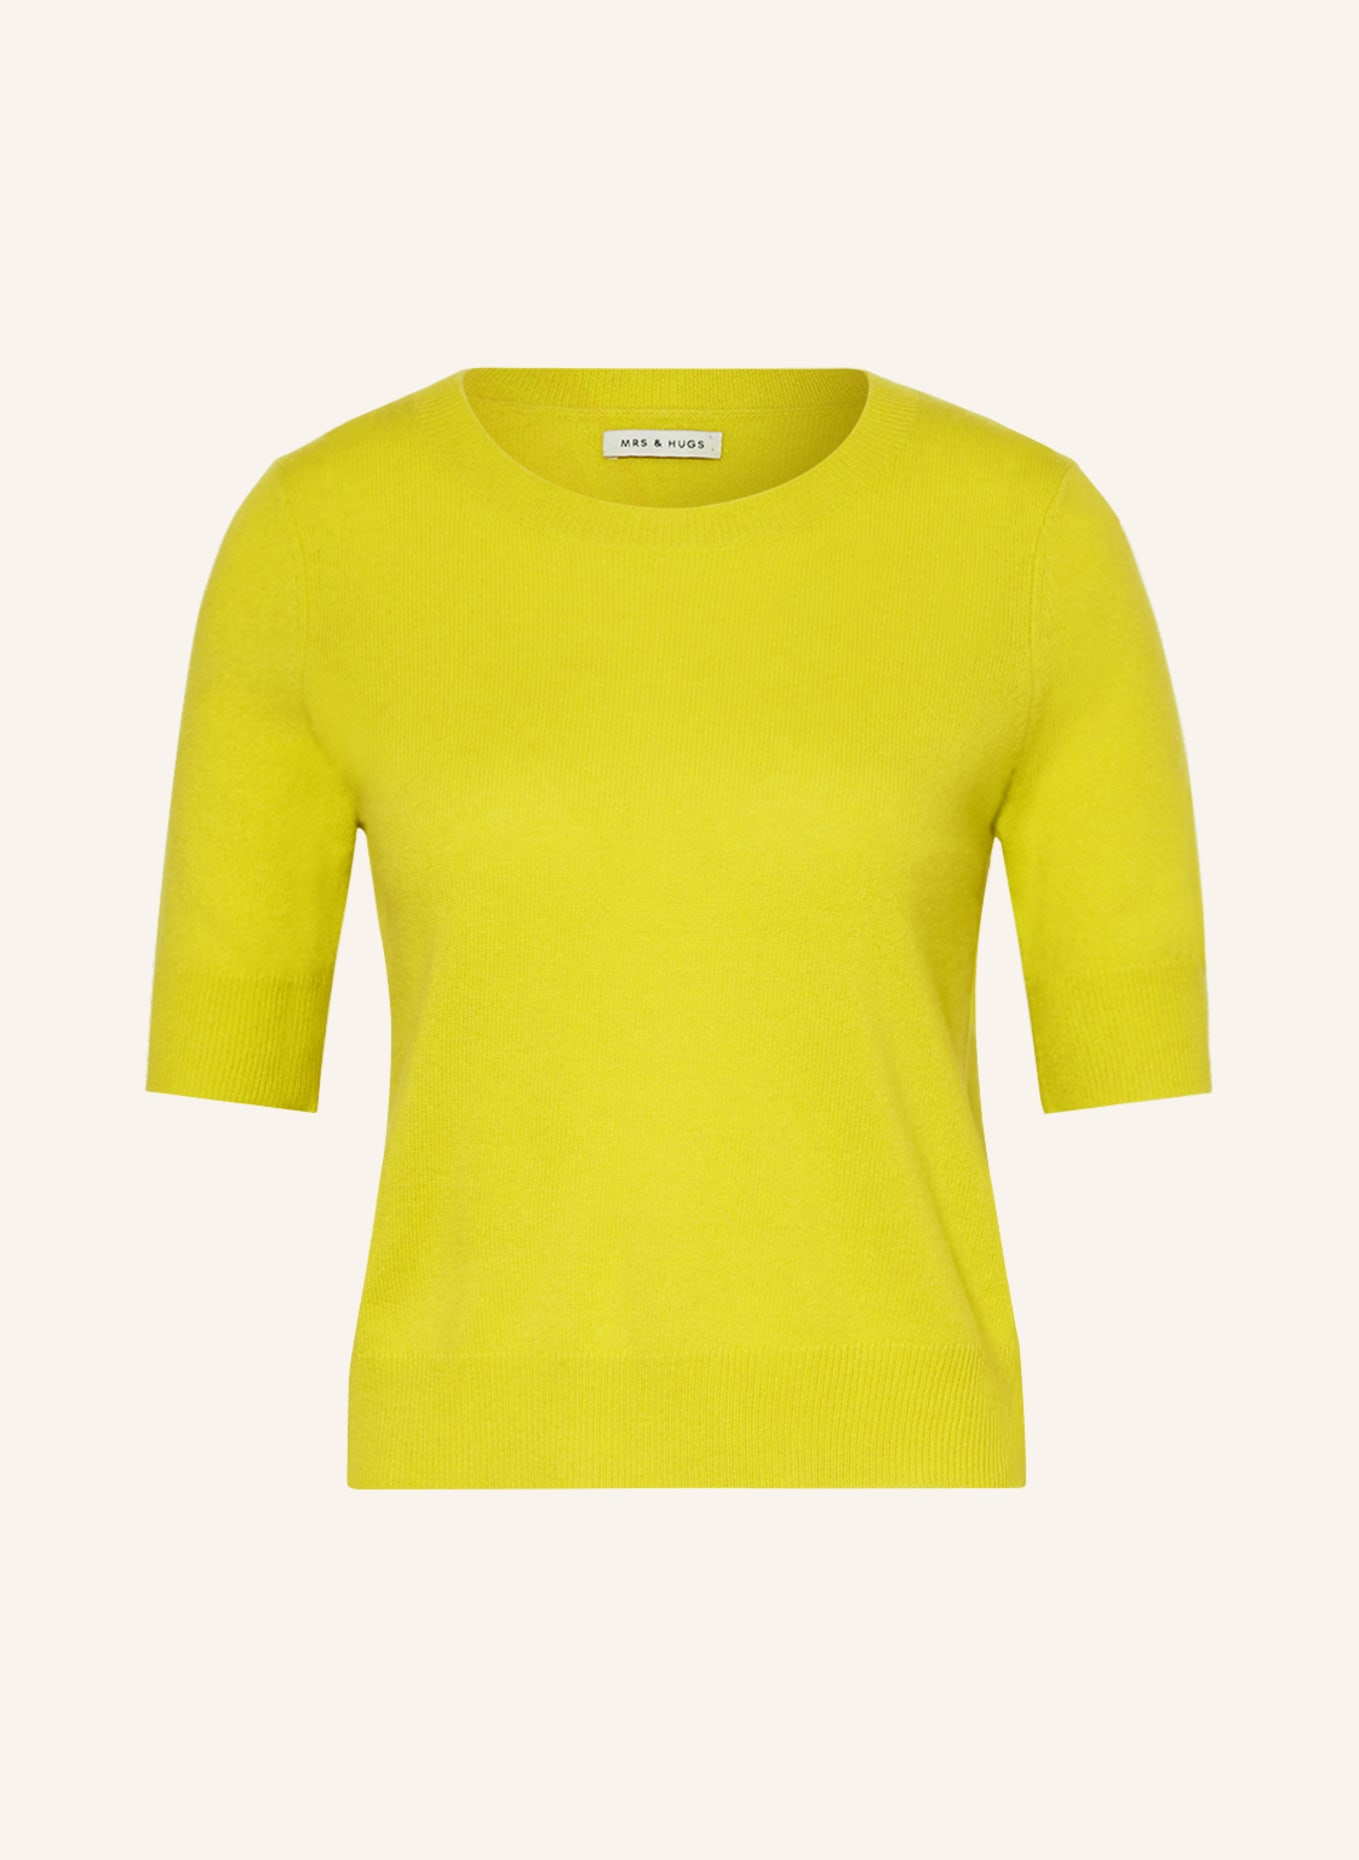 MRS & HUGS Knit shirt in cashmere, Color: YELLOW (Image 1)